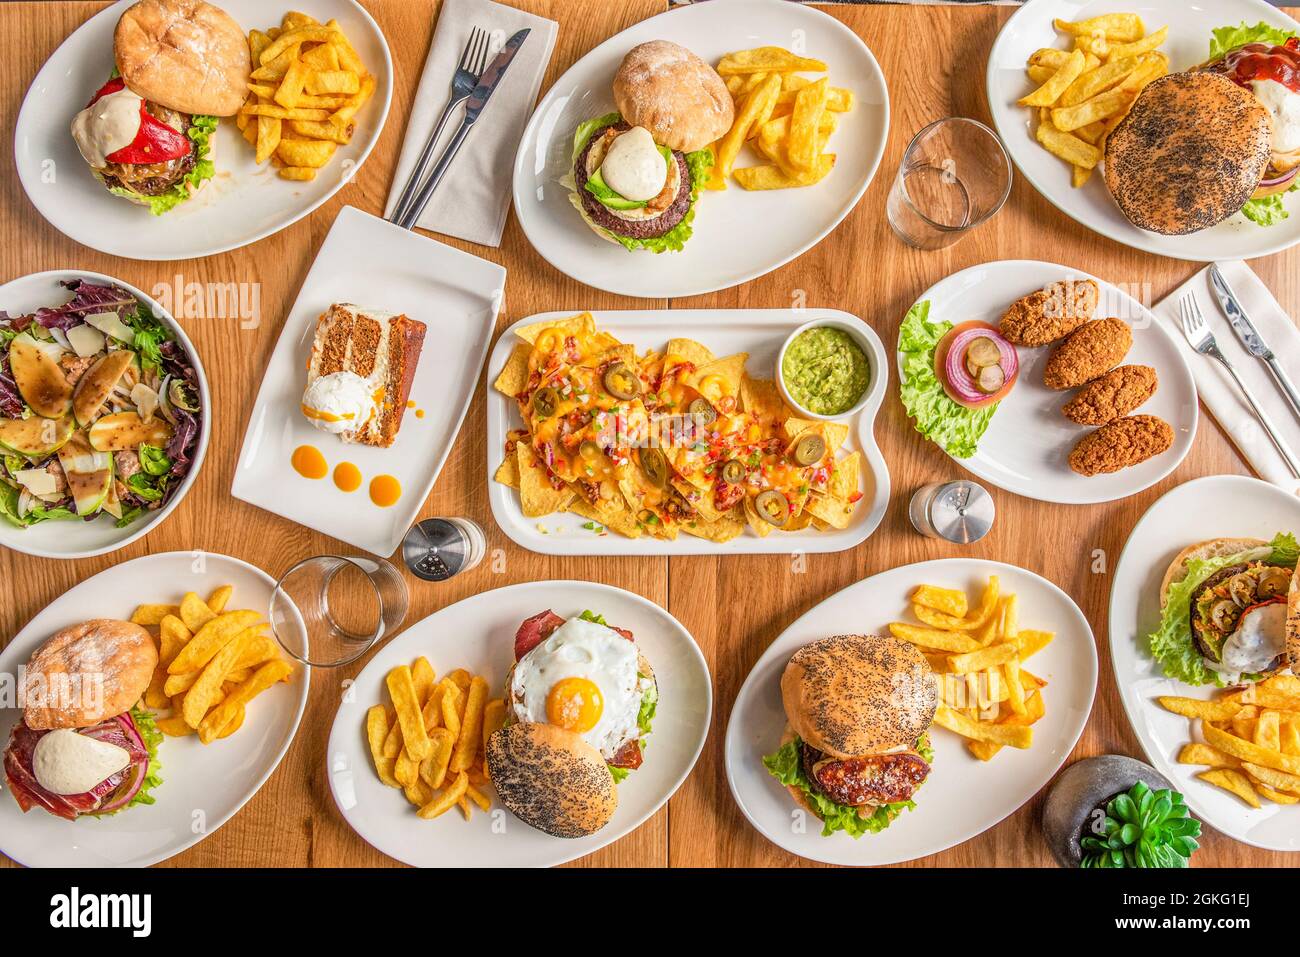 Set of plates of tex-mex food and hamburgers and appetizers on wooden table Stock Photo